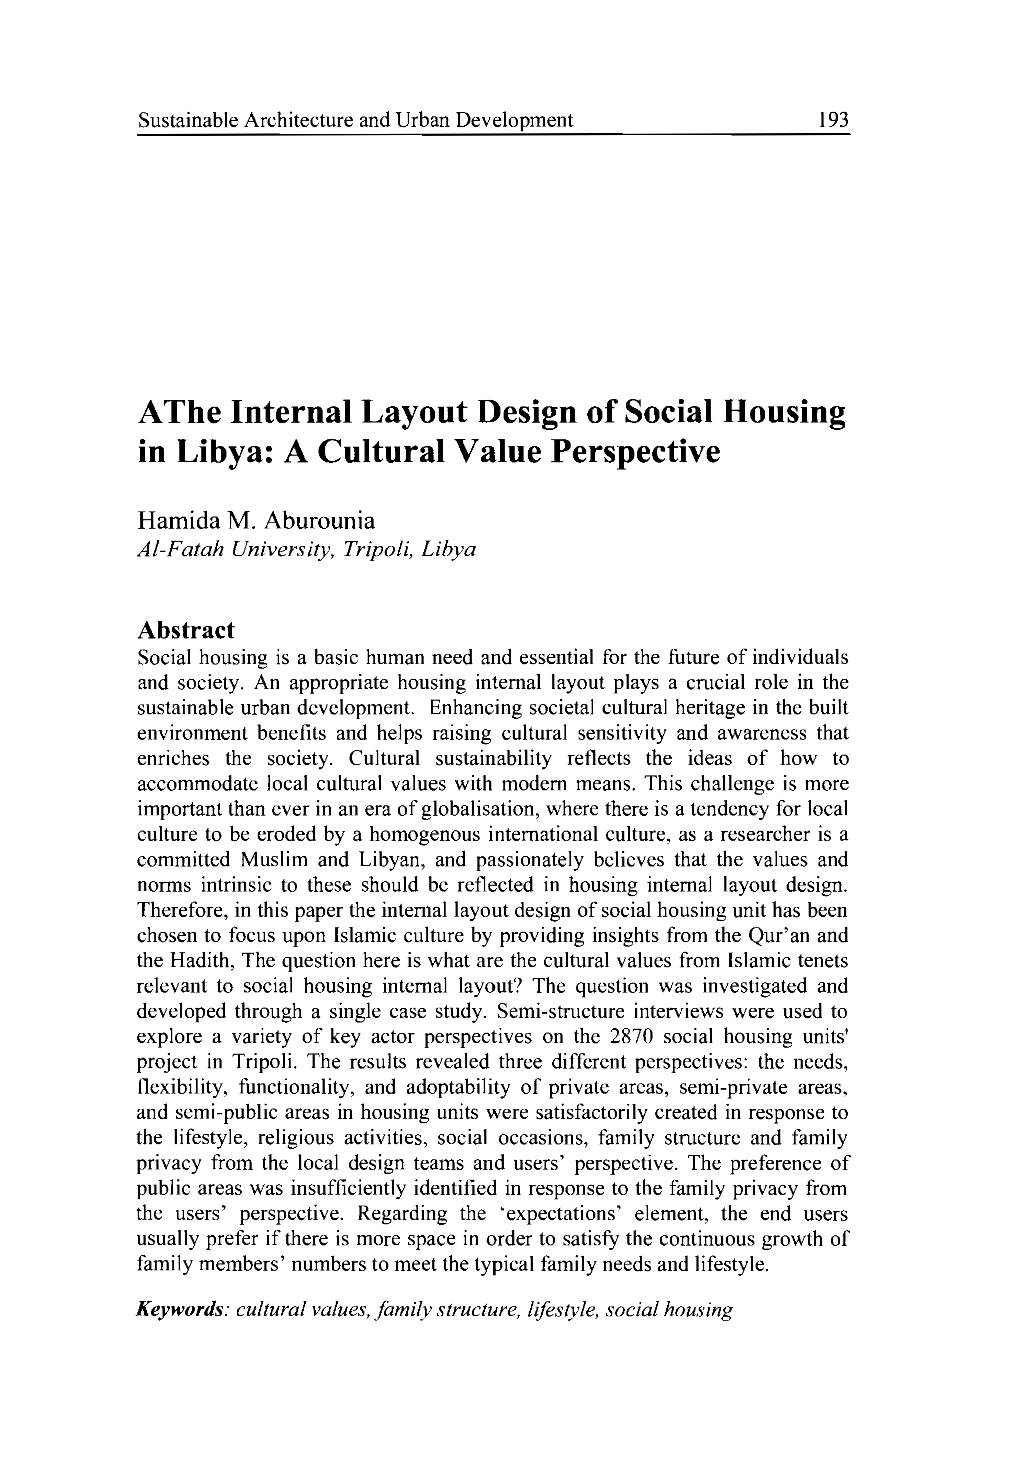 Athe Internal Layout Design of Social Housing in Libya: a Cultural Value Perspective